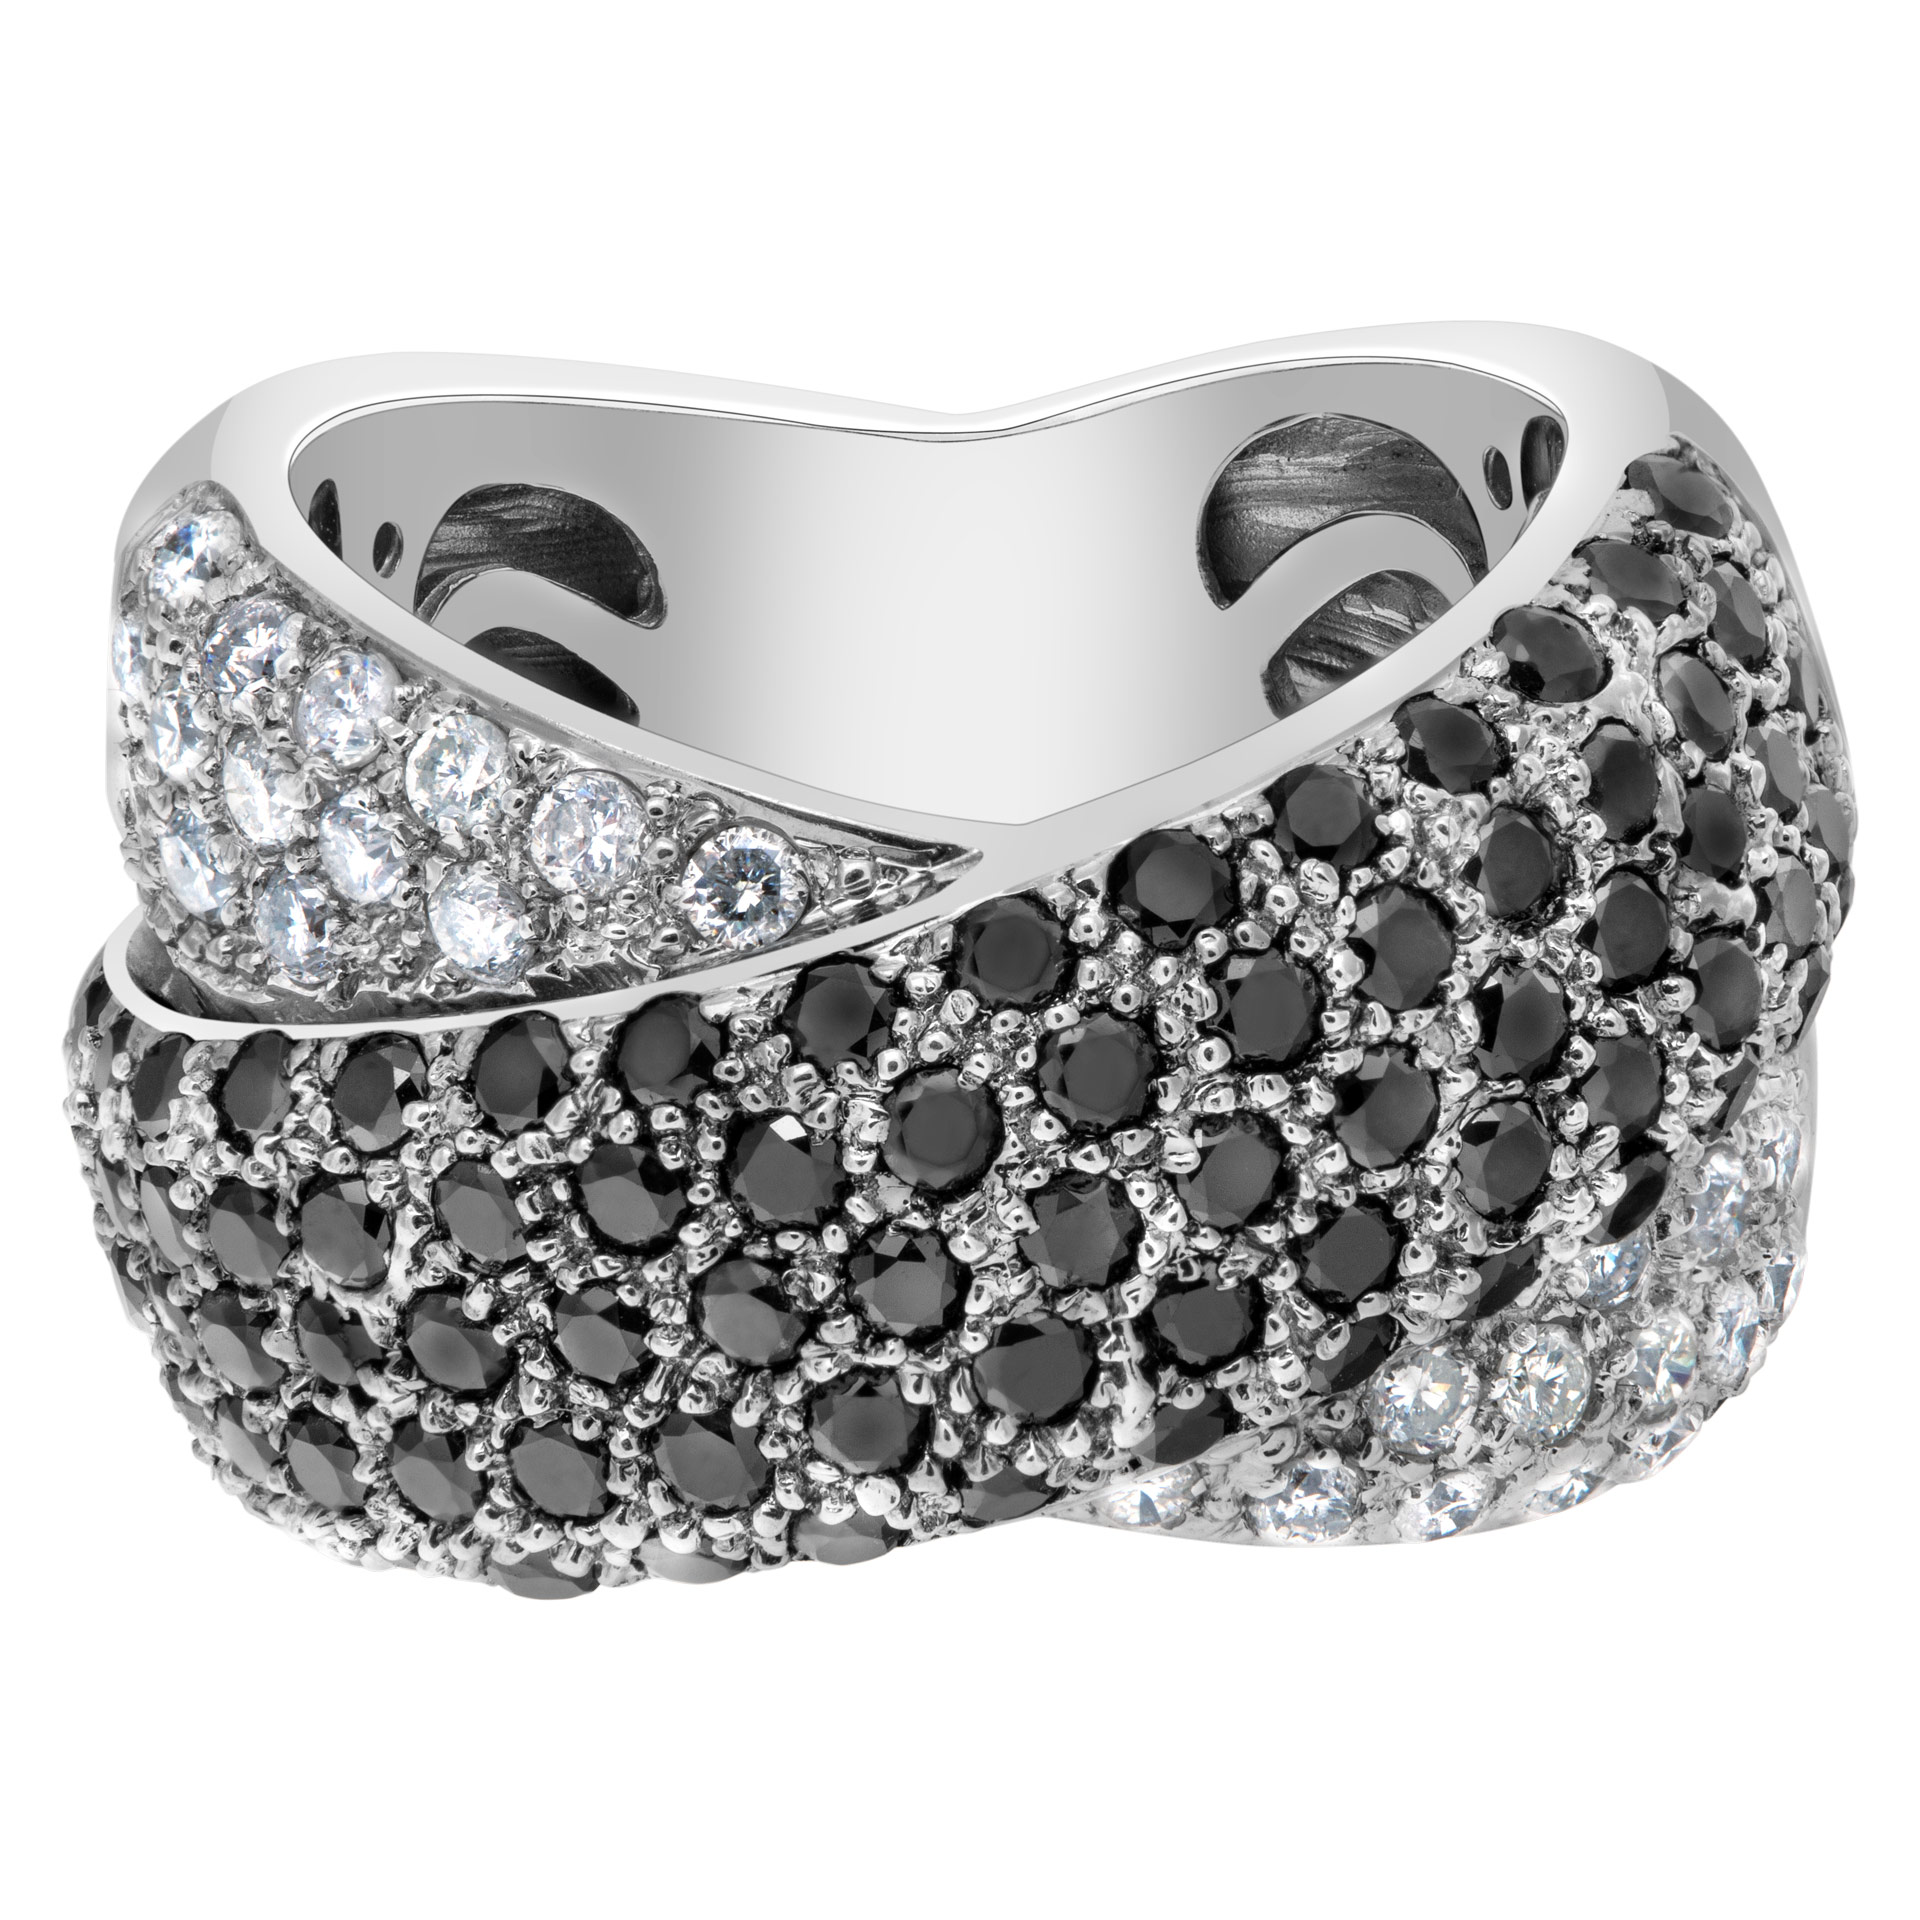 Black and white diamond X kiss ring in 14k white gold over 1.5 cts